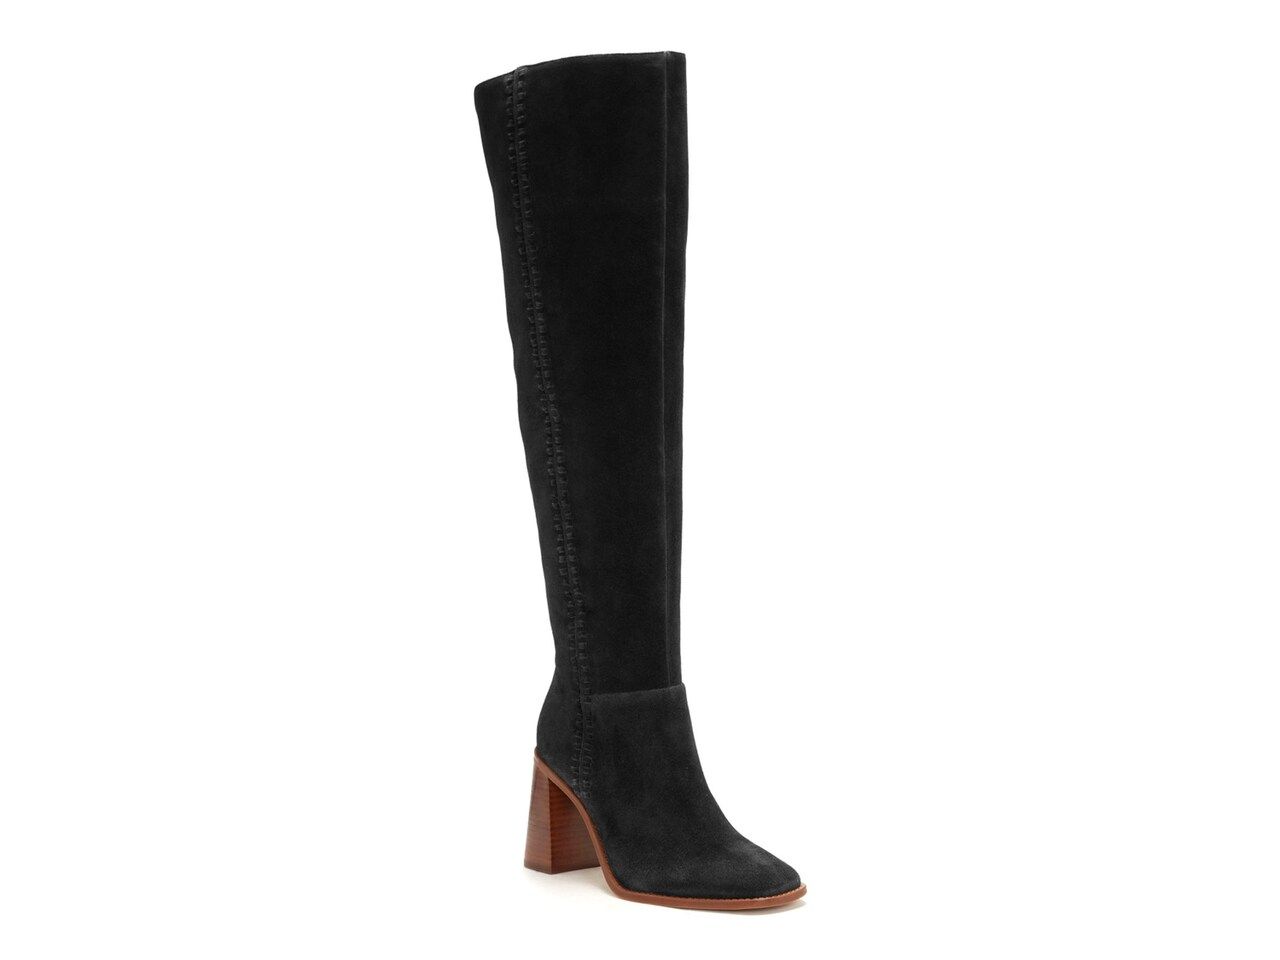 Vince Camuto Englea Over The Knee Boot | DSW